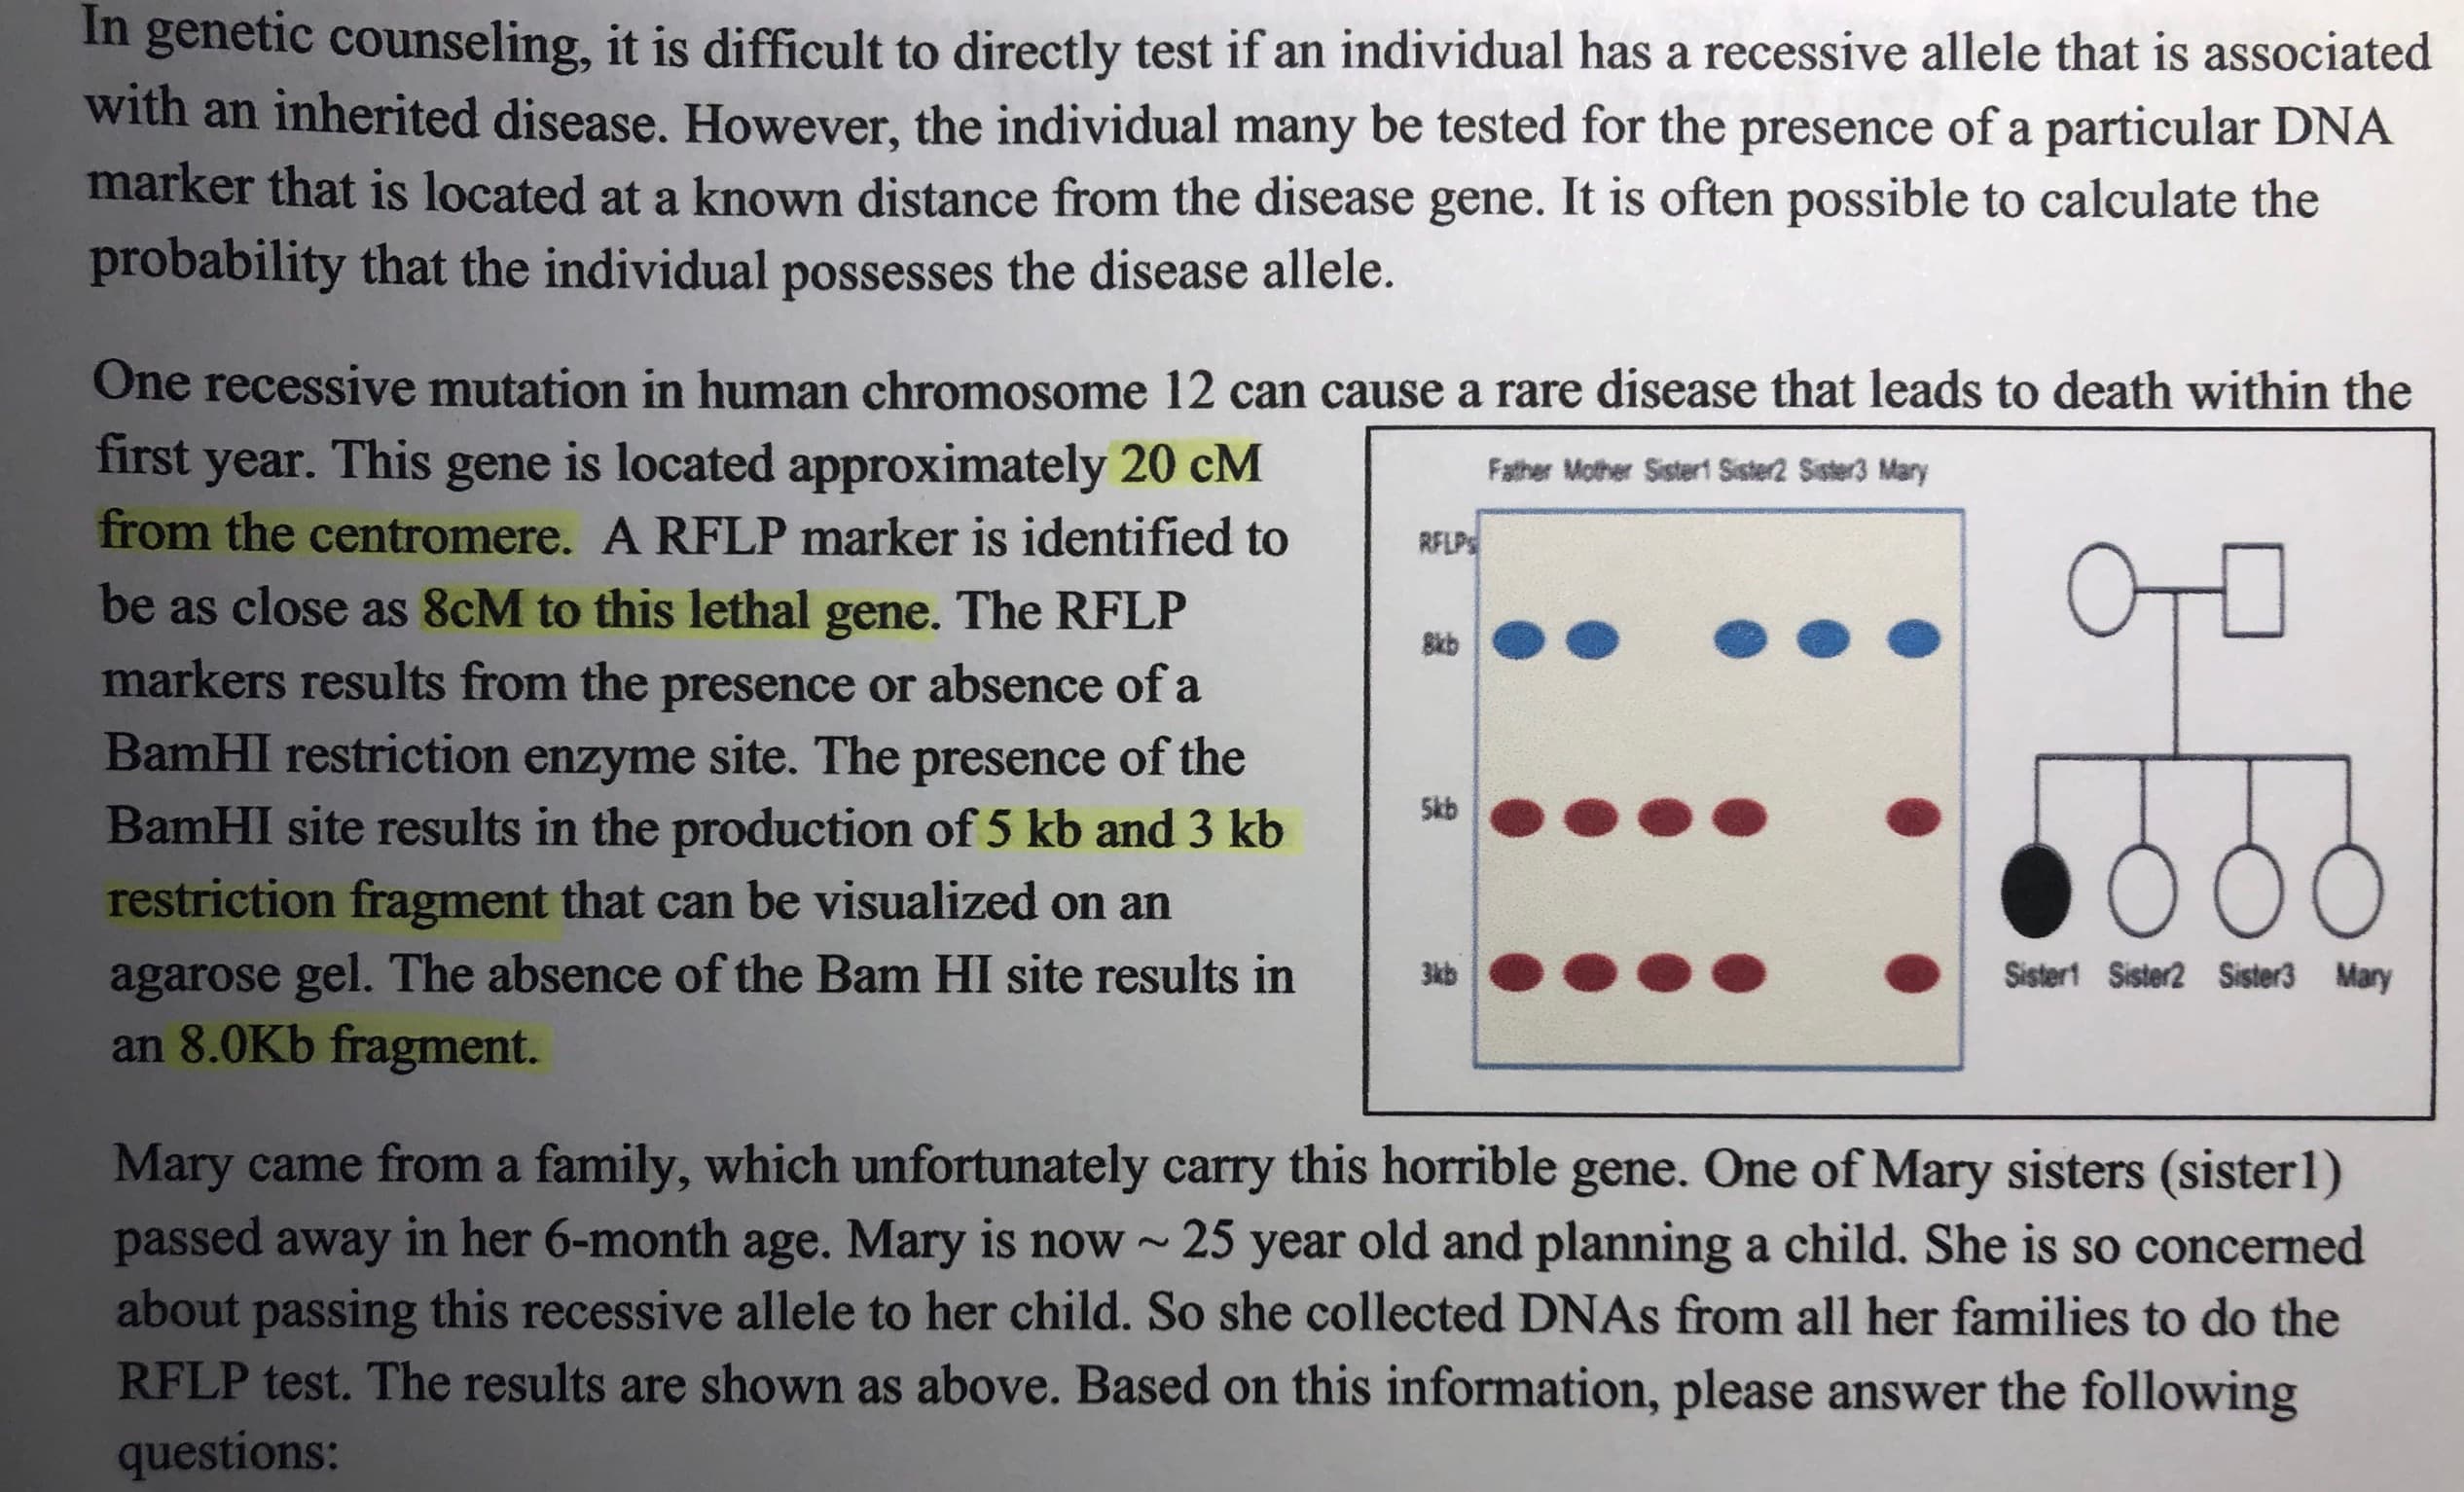 In genetic counseling, it is difficult to directly test if an individual has a recessive allele that is associated
with an inherited disease. However, the individual many be tested for the
marker that is located at a known distance from the disease gene. It is often possible to calculate the
probability that the individual possesses the disease allele.
presence of a particular DNA
One recessive mutation in human chromosome 12 can cause a rare disease that leads to death within the
first year. This
is located approximately 20 cM
from the centromere. A RFLP marker is identified to
gene
Father Mother Sister Sister2 Sister3 Mary
RFLPS
be as close as 8cM to this lethal
The RFLP
gene.
Skb
markers results from the presence or absence of a
BamHI restriction
presence of the
BamHI site results in the production of 5 kb and 3 kb
restriction fragment that can be visualized on an
site. The
enzyme
Skb
agarose gel. The absence of the Bam HI site results in
an 8.0Kb fragment.
Sistert Sister2 Sister3 Mary
3kdb
Mary came froma family, which unfortunately carry this horrible gene. One of Mary sisters (sister1)
passed away in her 6-month age. Mary is now~
about passing this recessive allele to her child. So she collected DNAS from all her families to do the
RFLP test. The results are shown as above. Based on this information, please answer the following
questions:
old and planning a child. She is so concerned
25
year
alb
